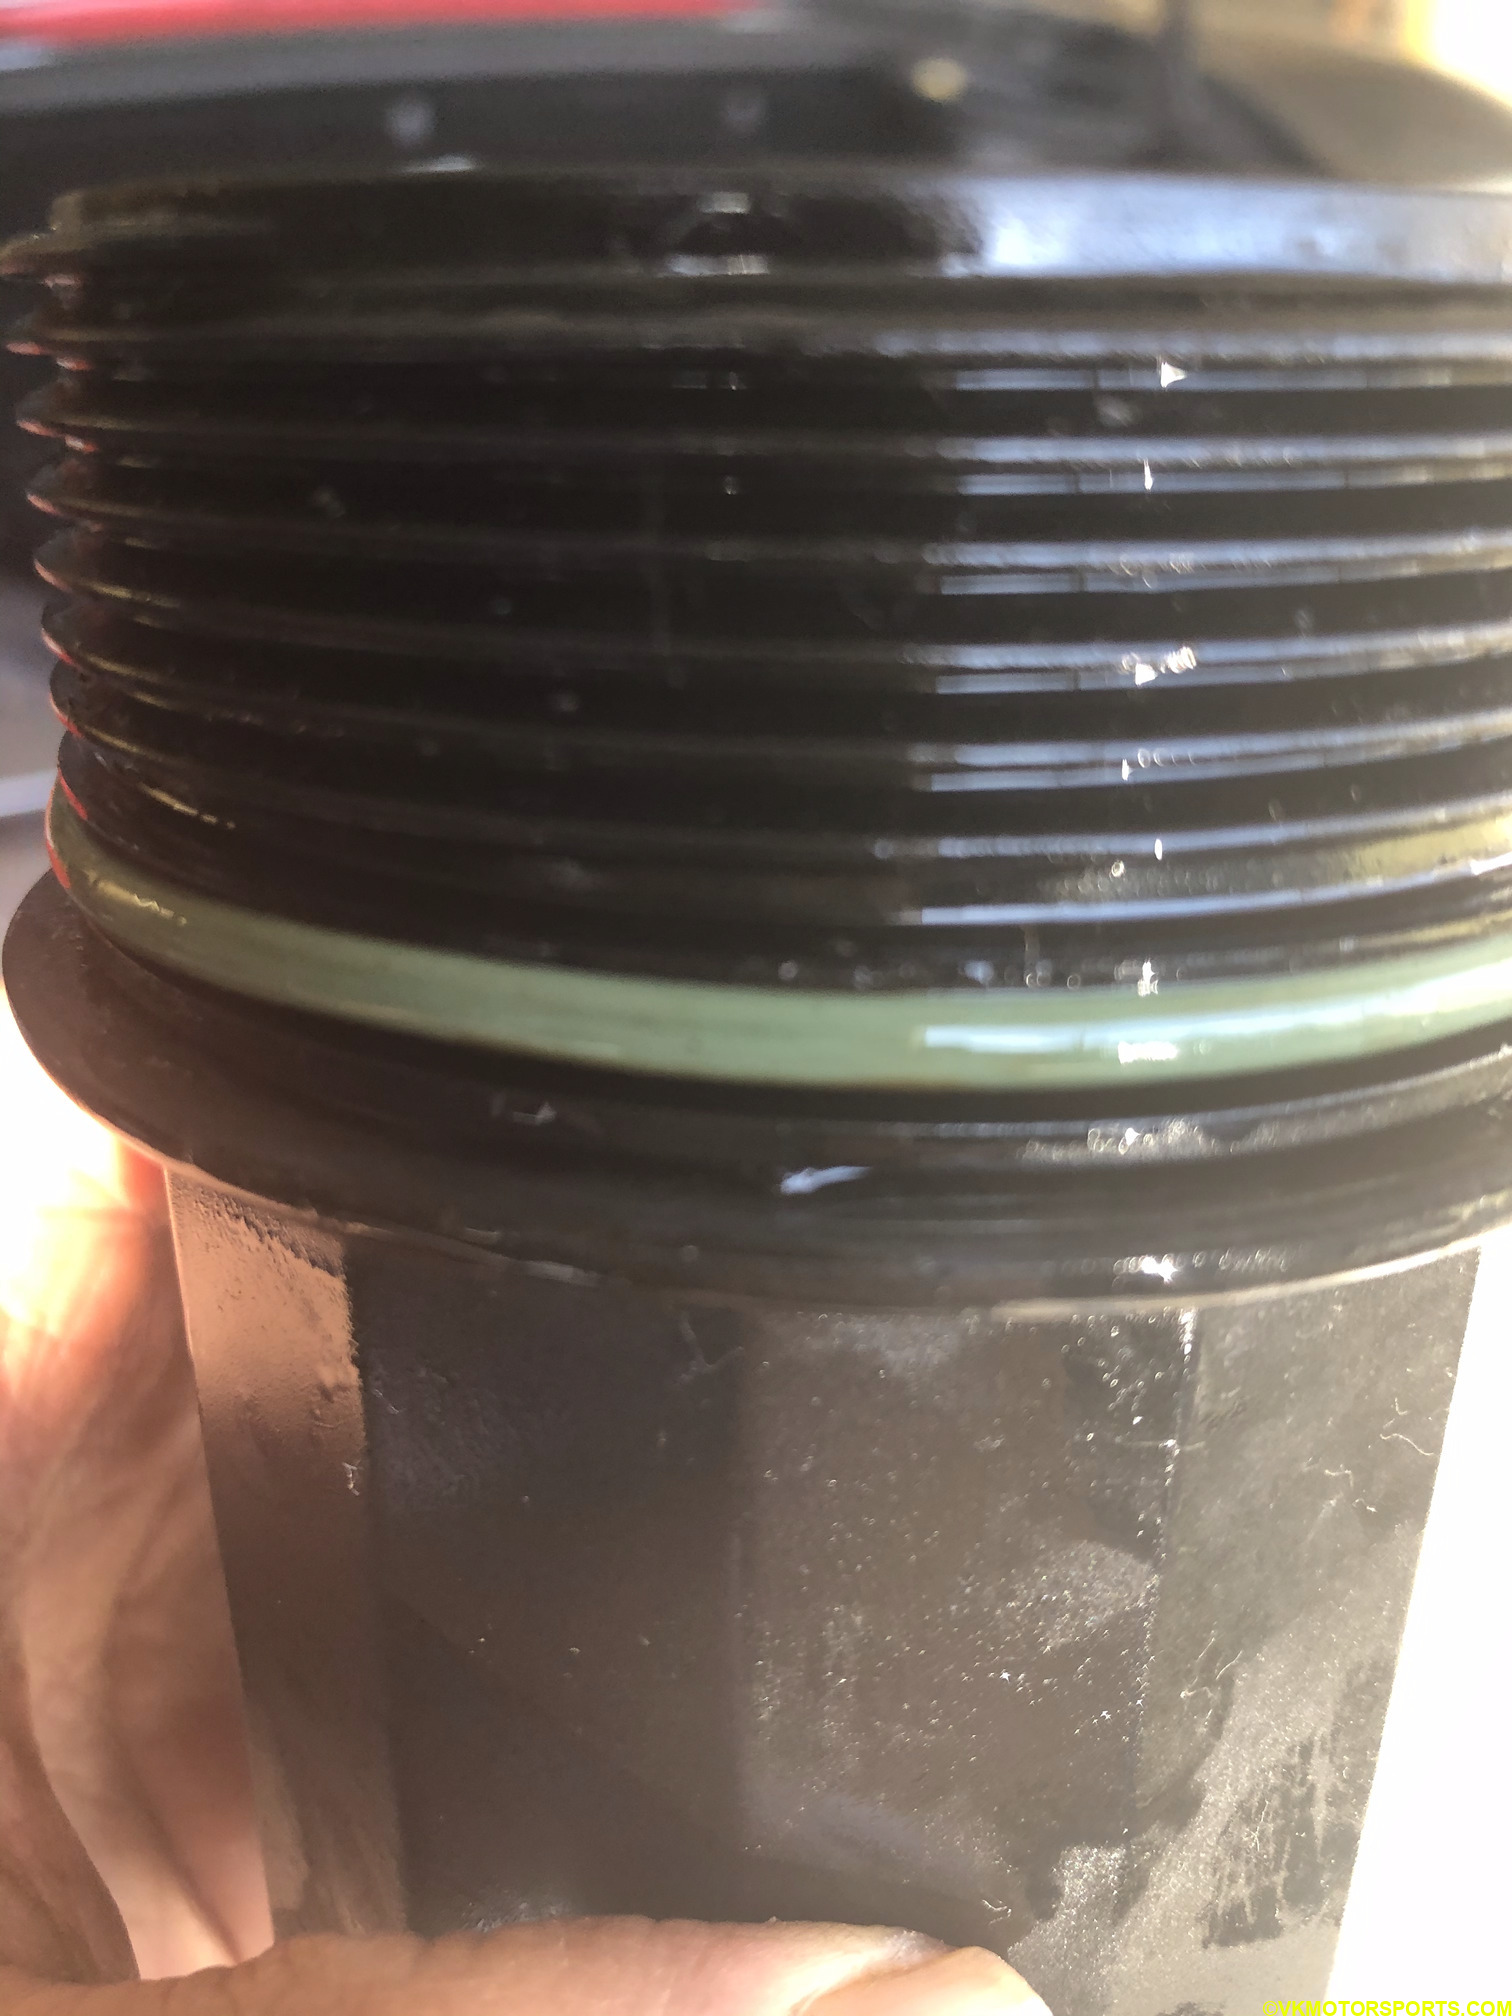 Figure 17. Lubricated new O-Ring installed on filter housing